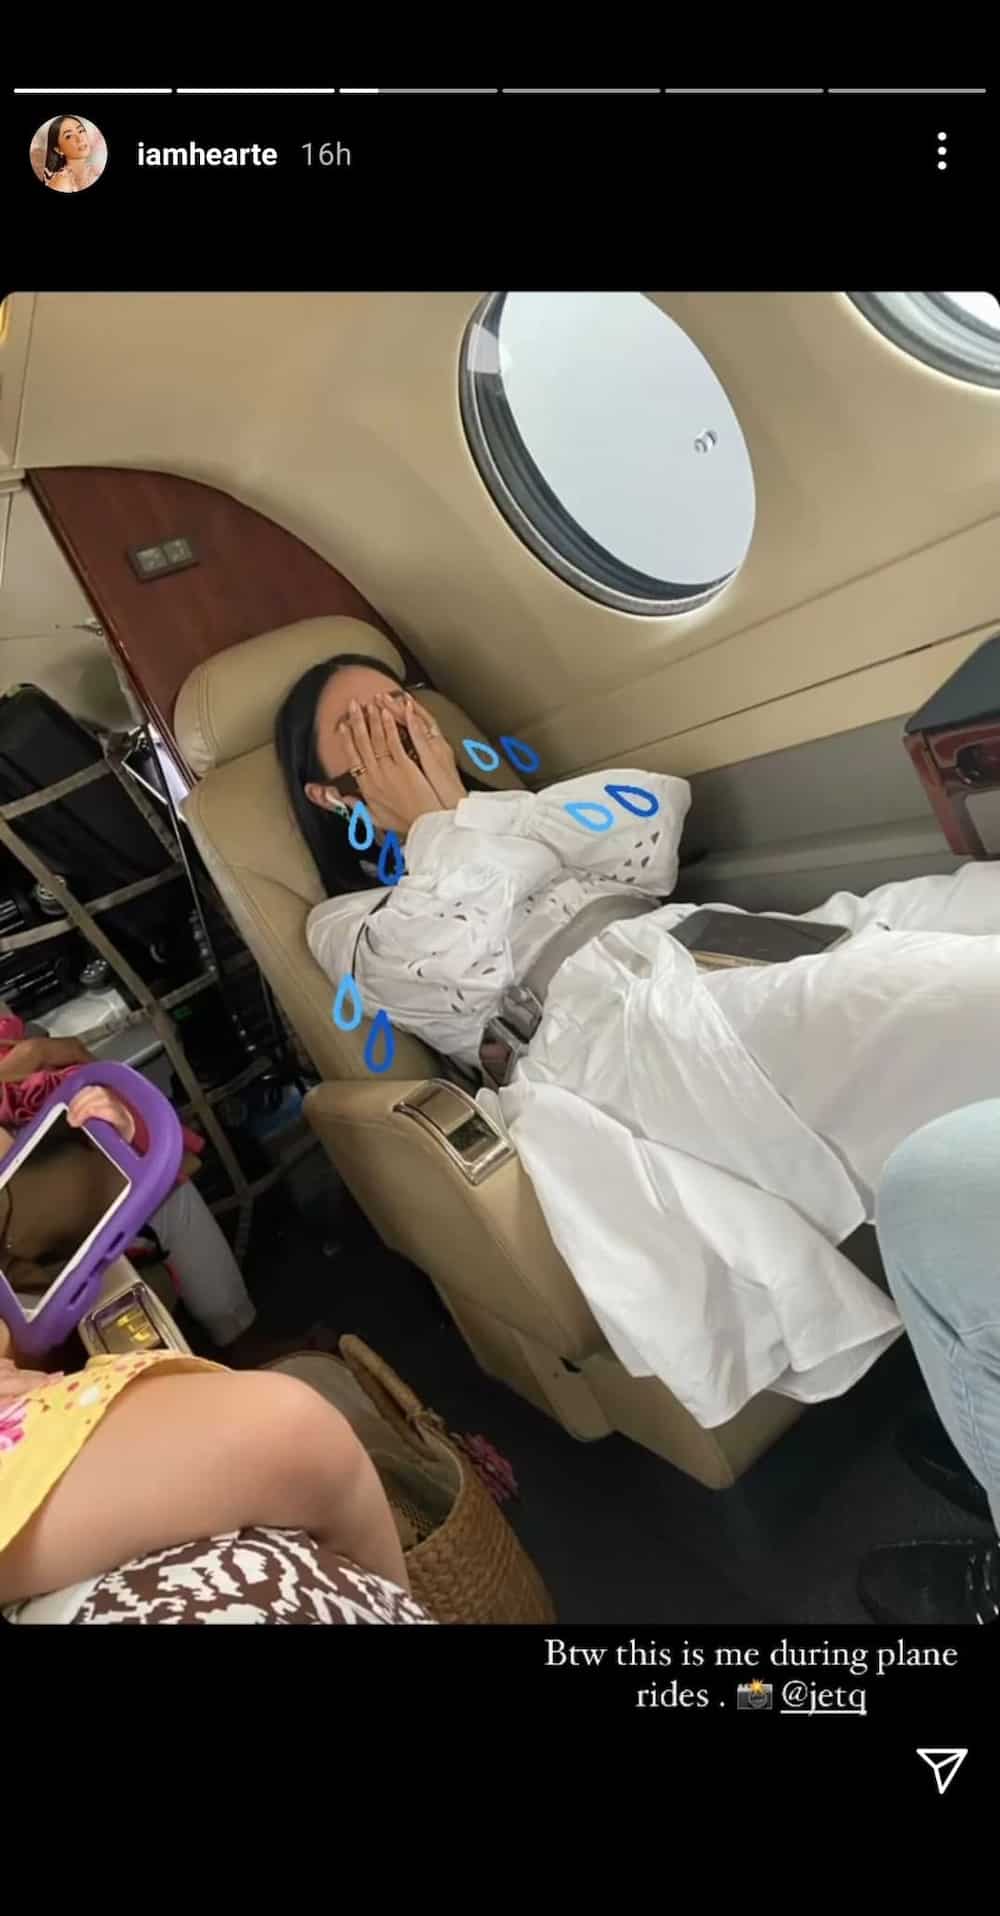 Heart Evangelista's "major anxiety" post about plane rides goes viral